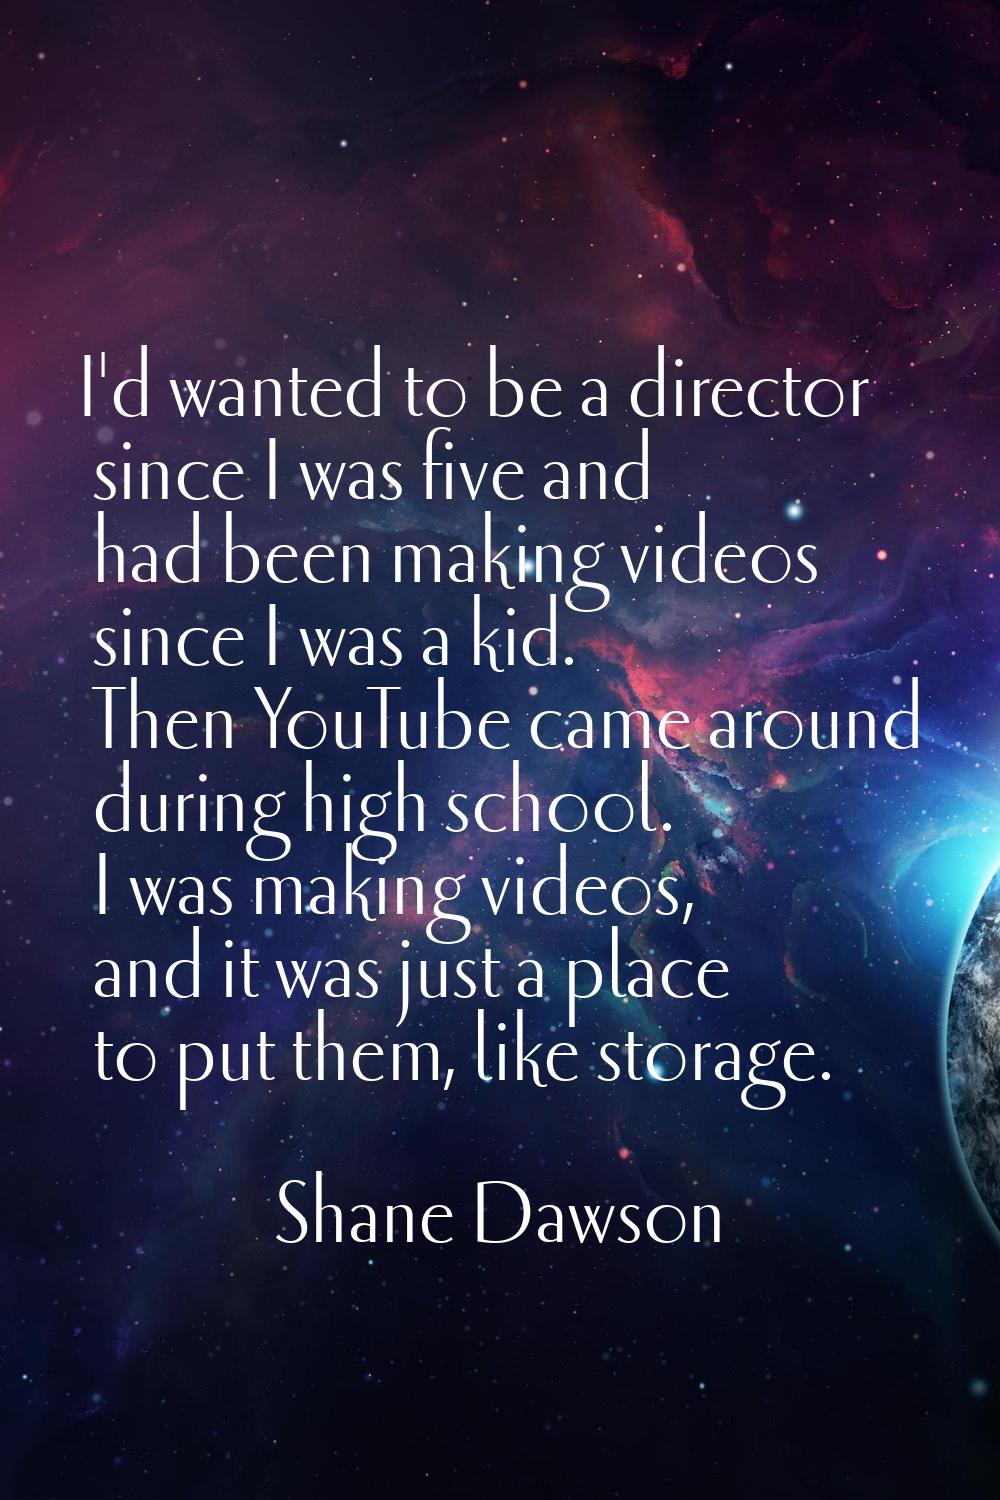 I'd wanted to be a director since I was five and had been making videos since I was a kid. Then You